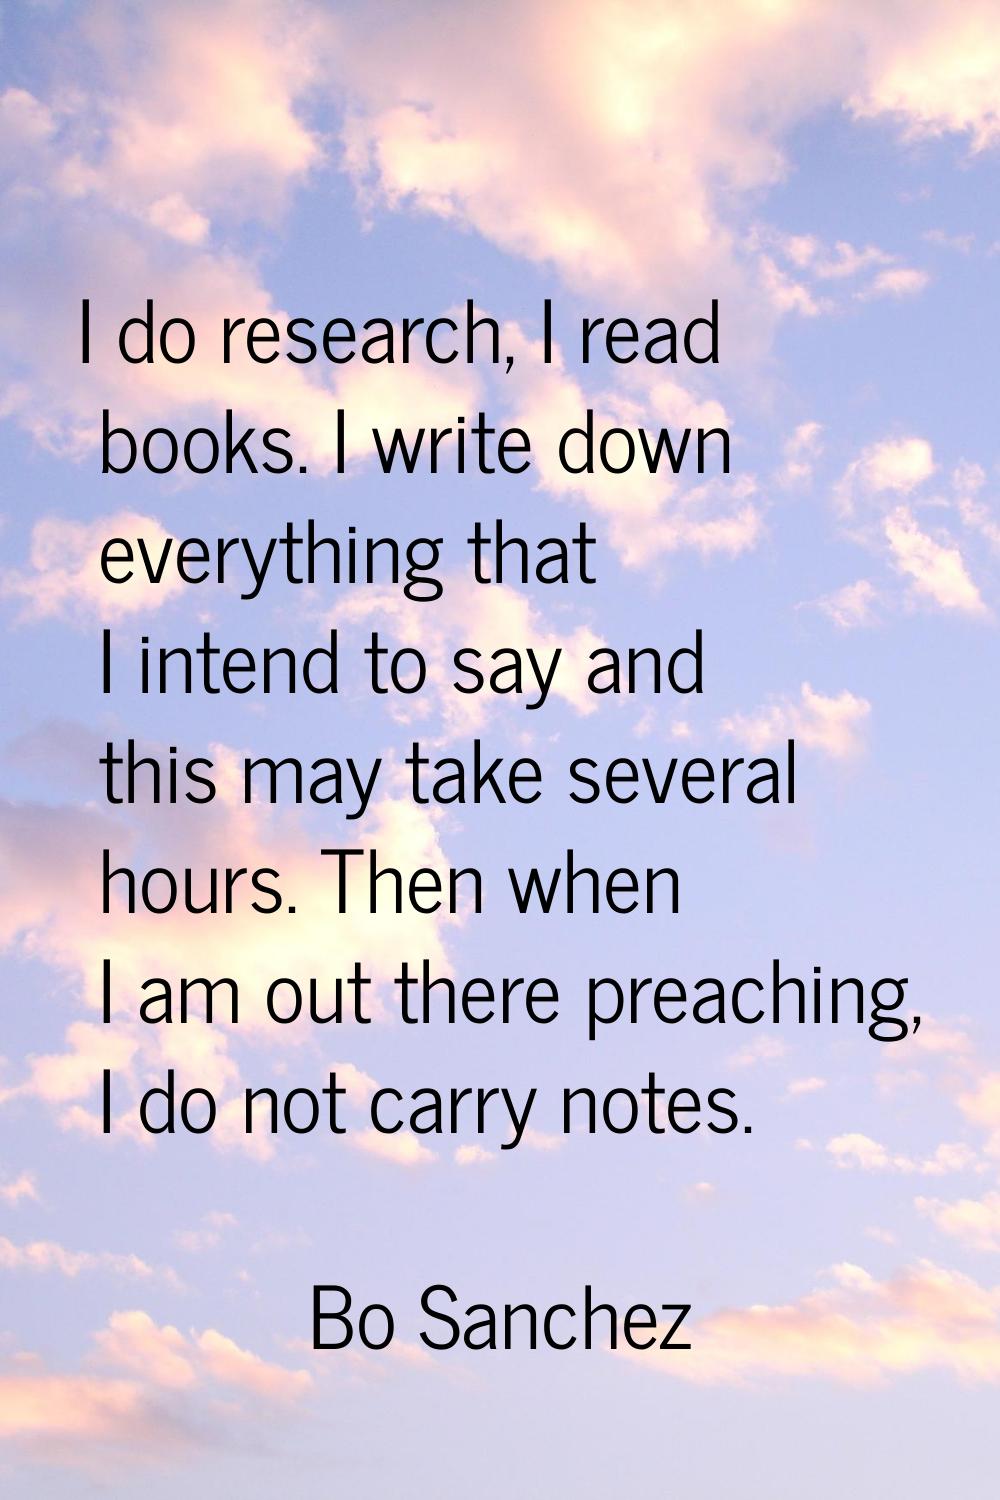 I do research, I read books. I write down everything that I intend to say and this may take several